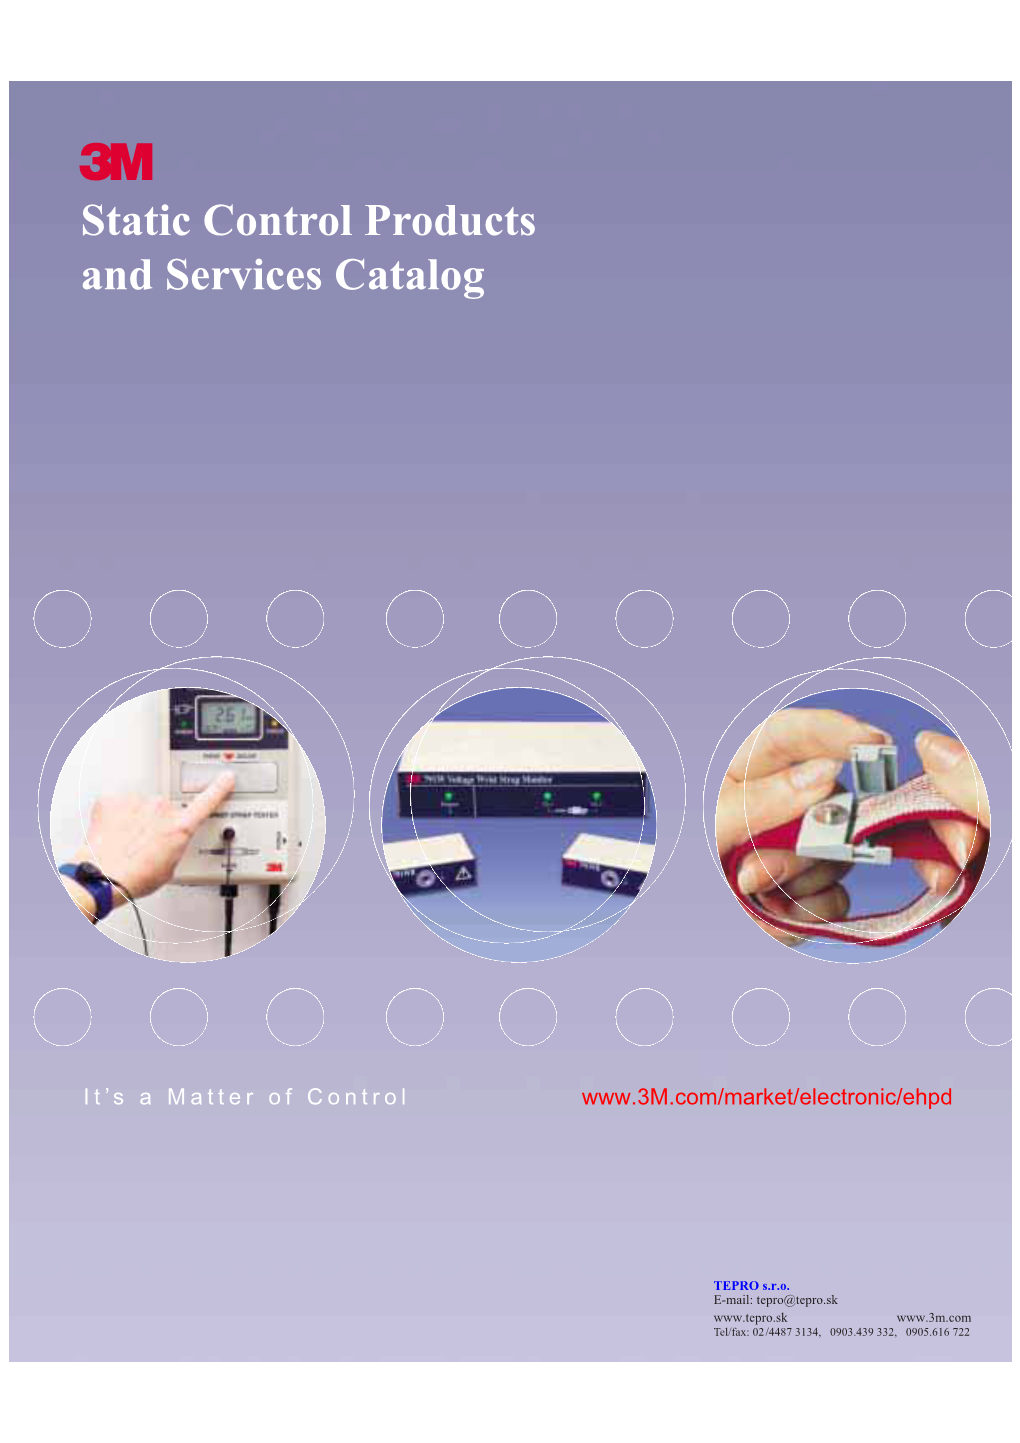 Static Control Products and Services Catalog